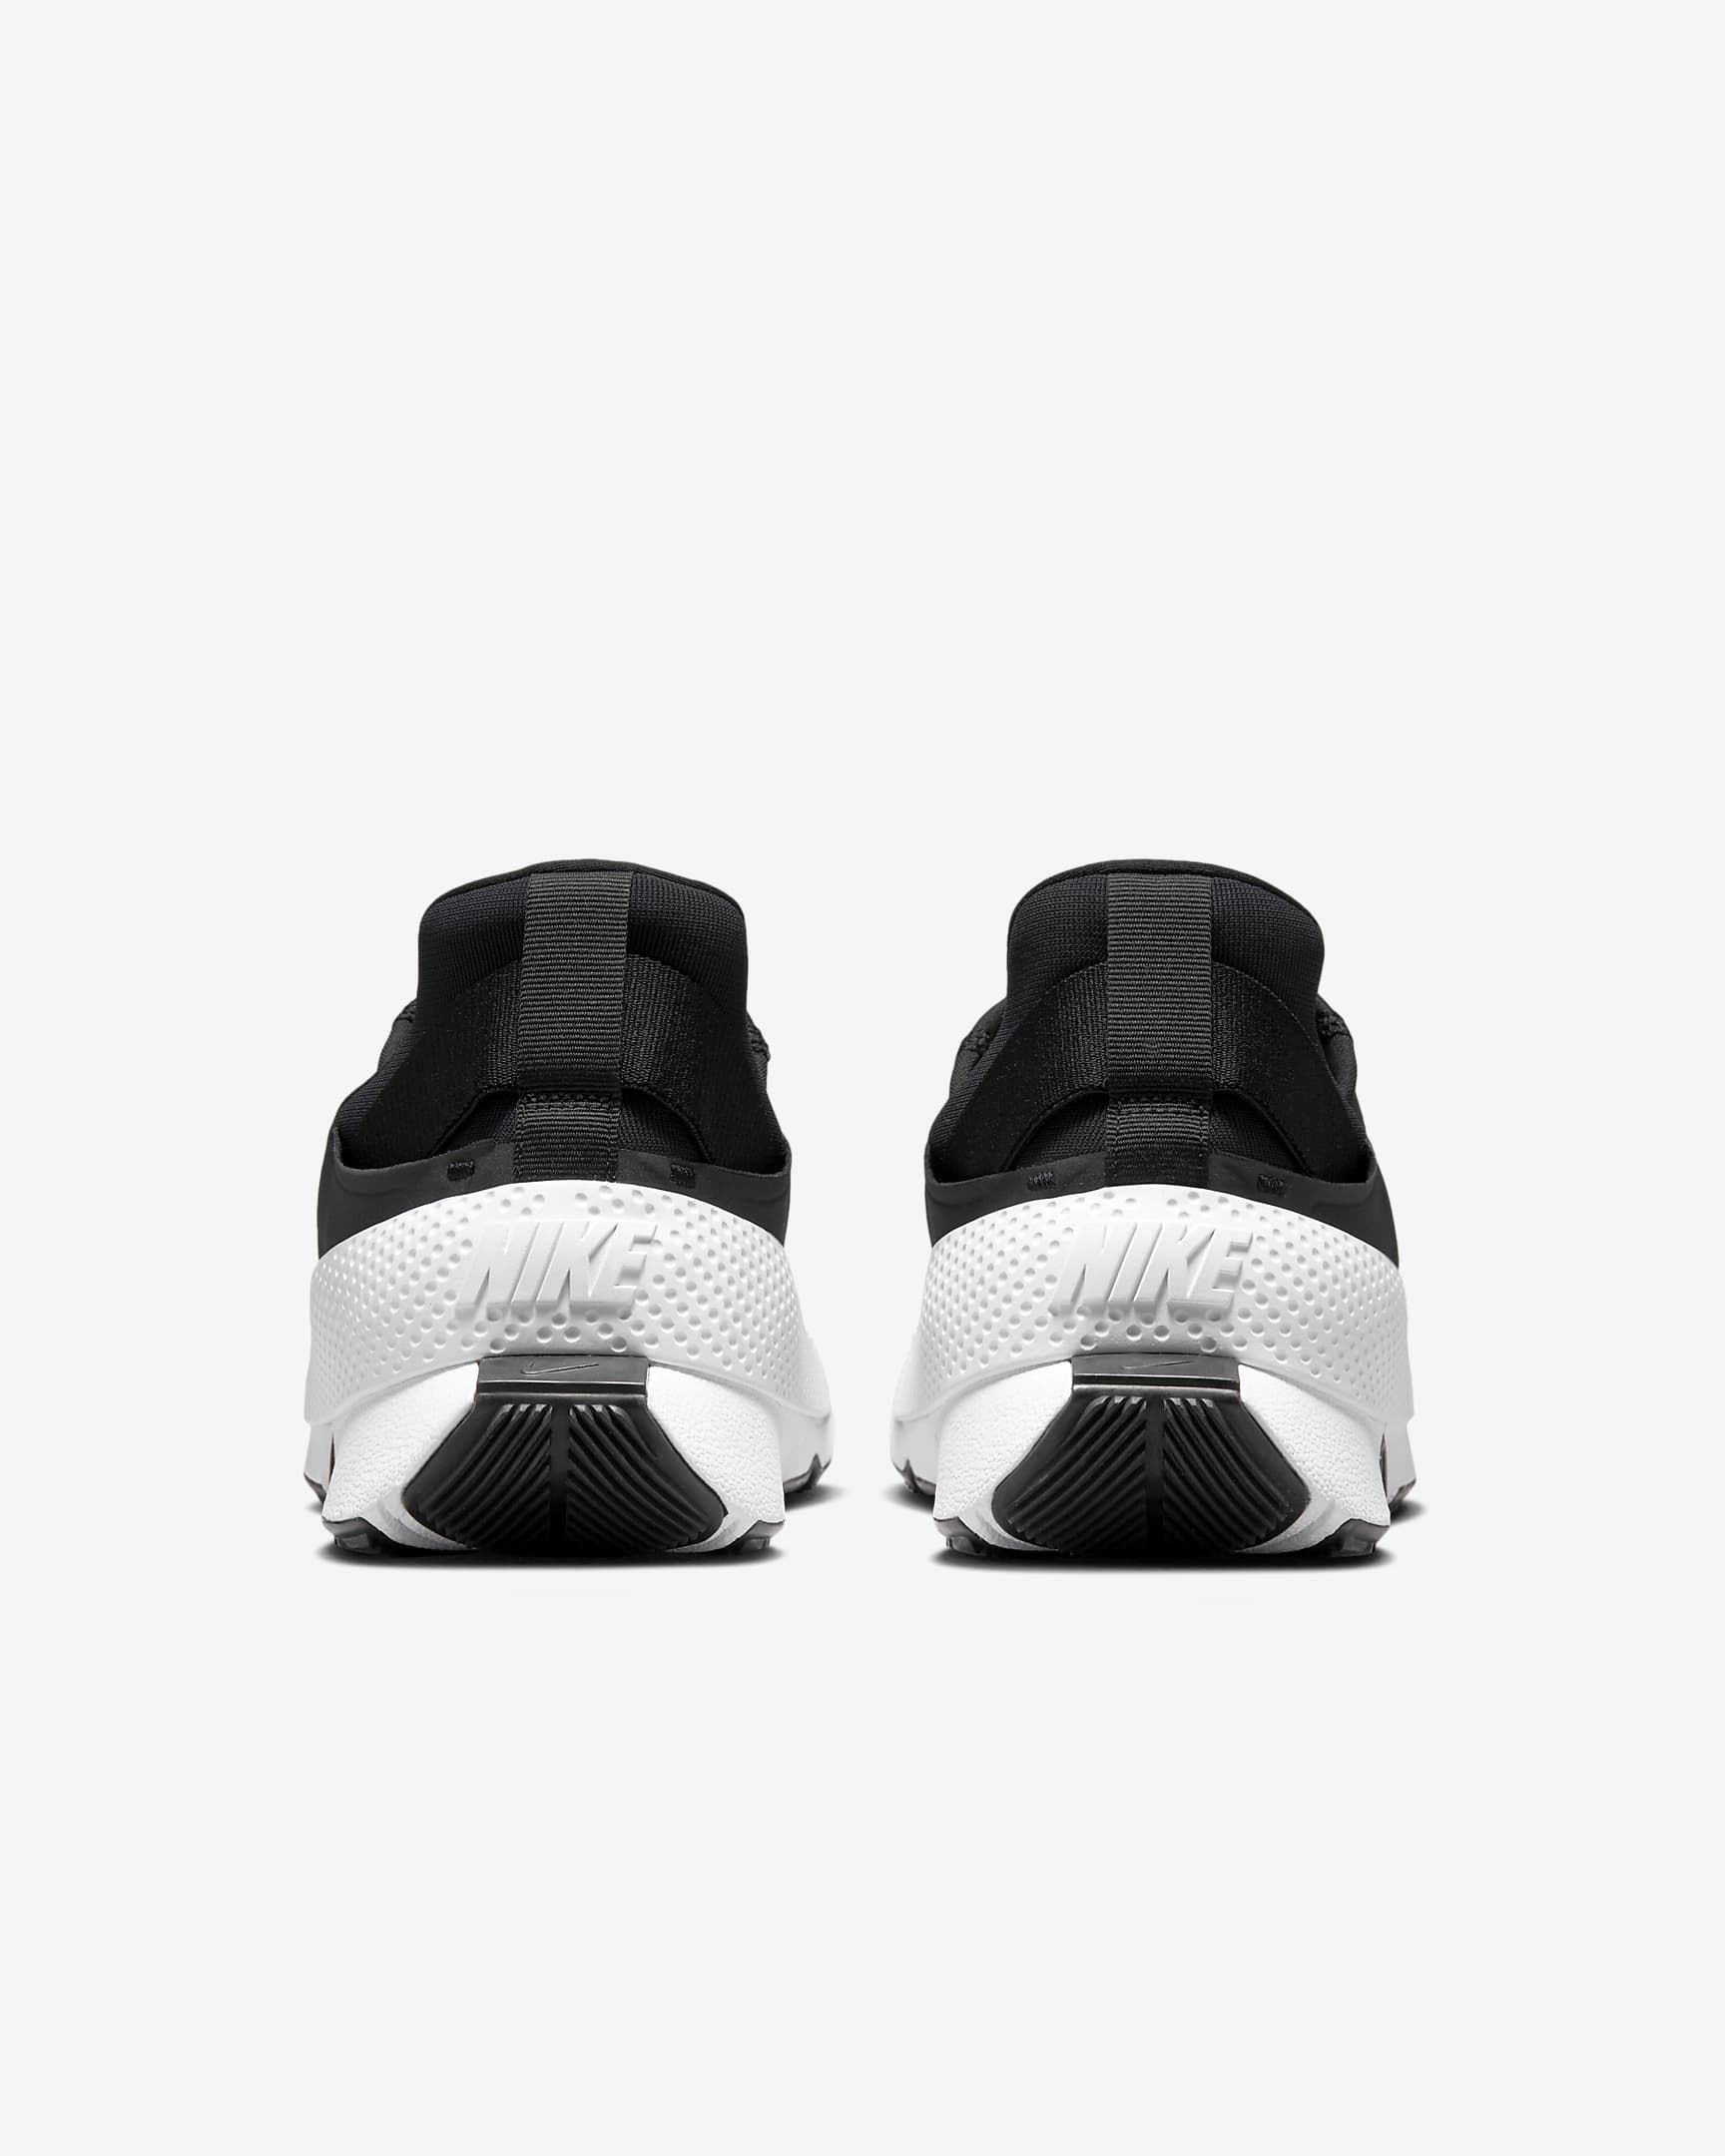 Nike Go FlyEase Easy On/Off Shoes - Black/White